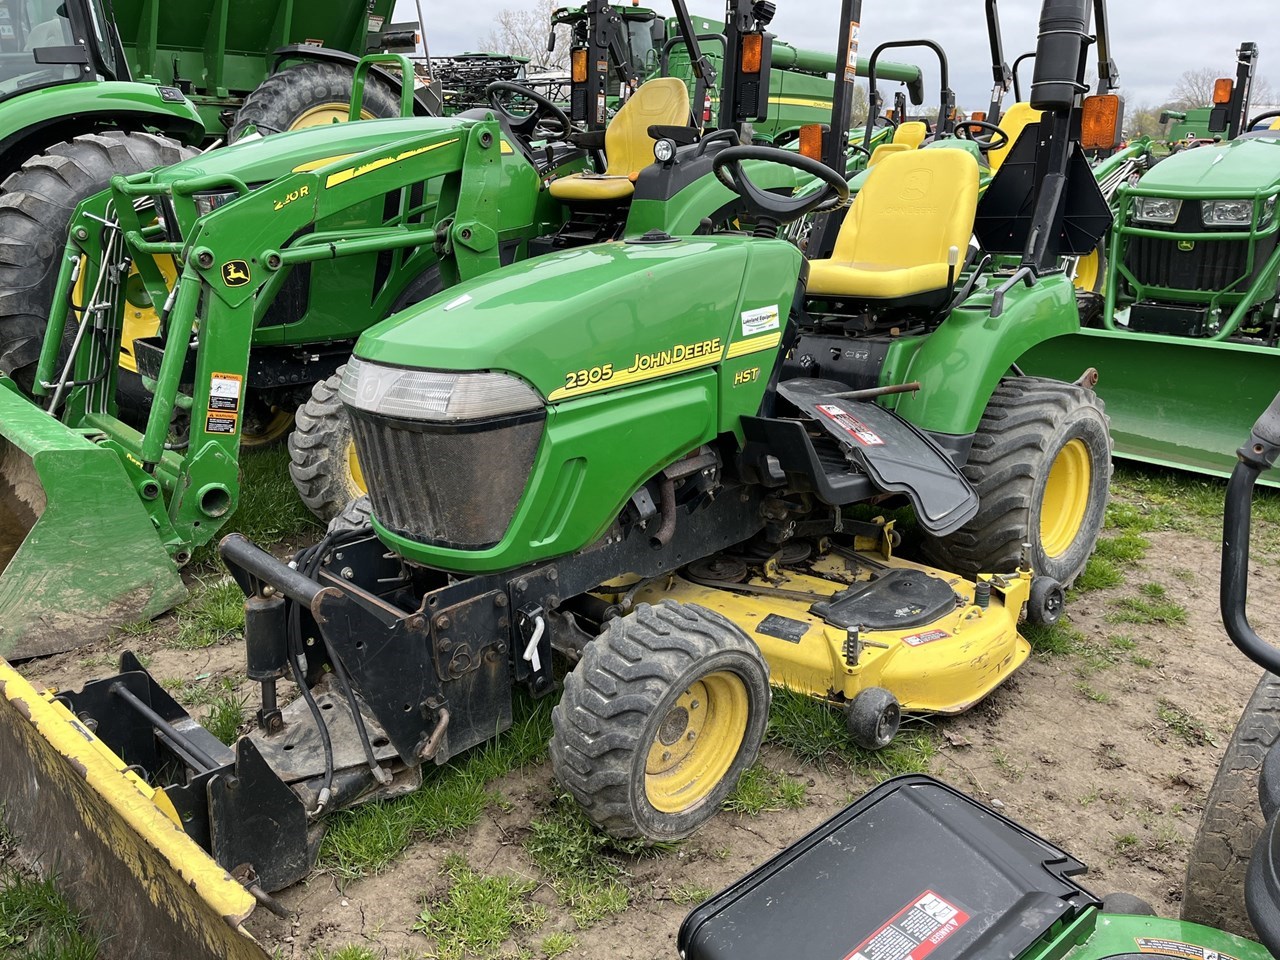 2008 John Deere 2305 Tractor - Compact Utility For Sale